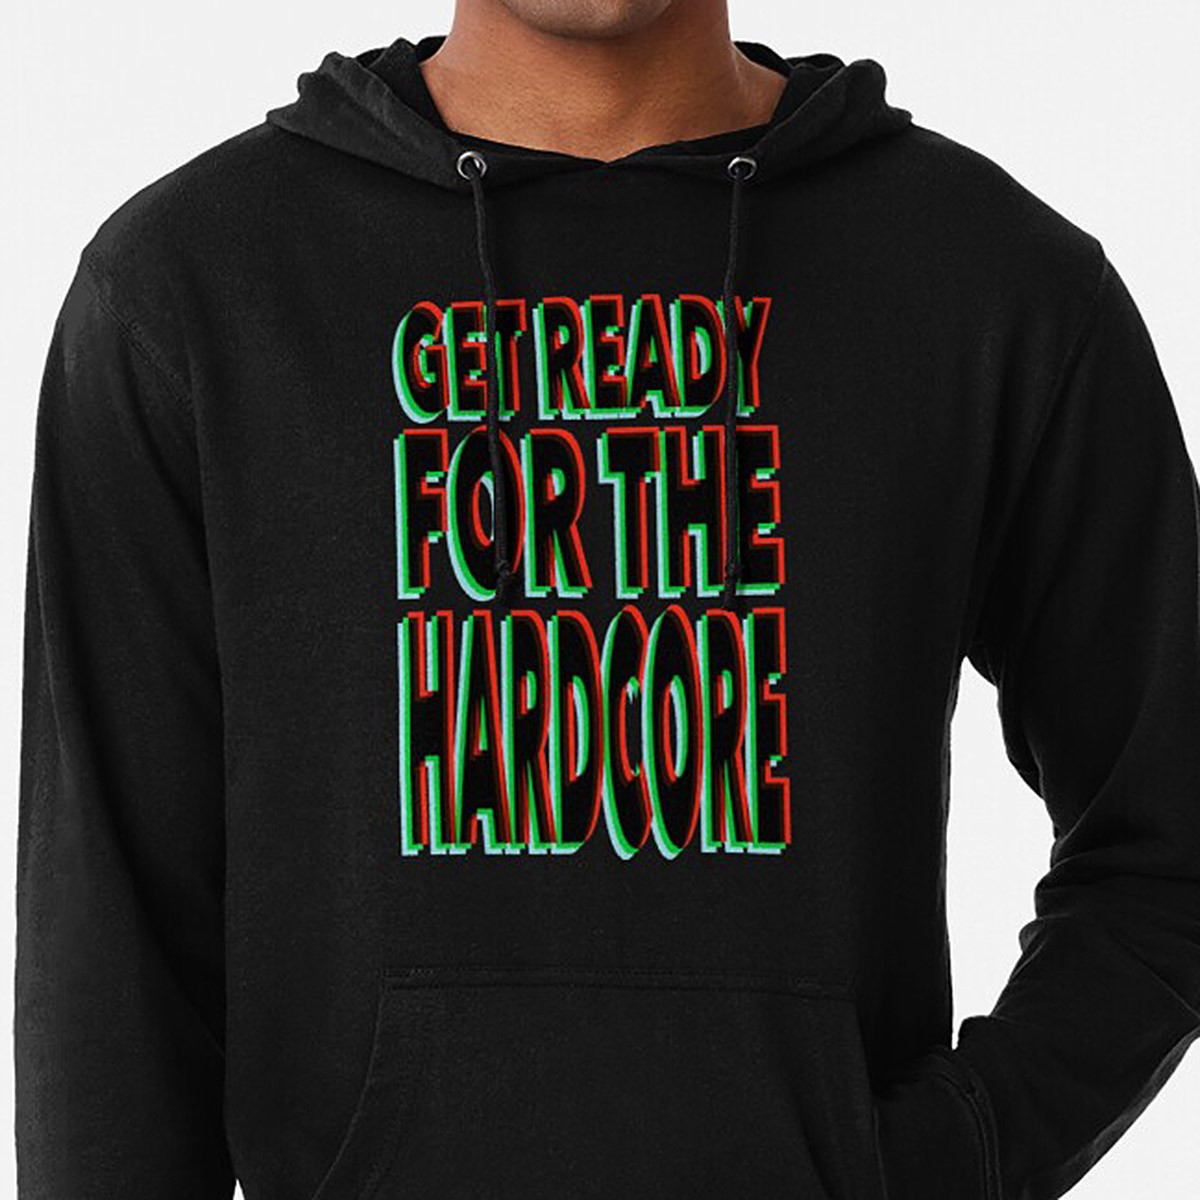 Get Ready for the Hardcore  Lightweight Hoodie by NTK Apparel